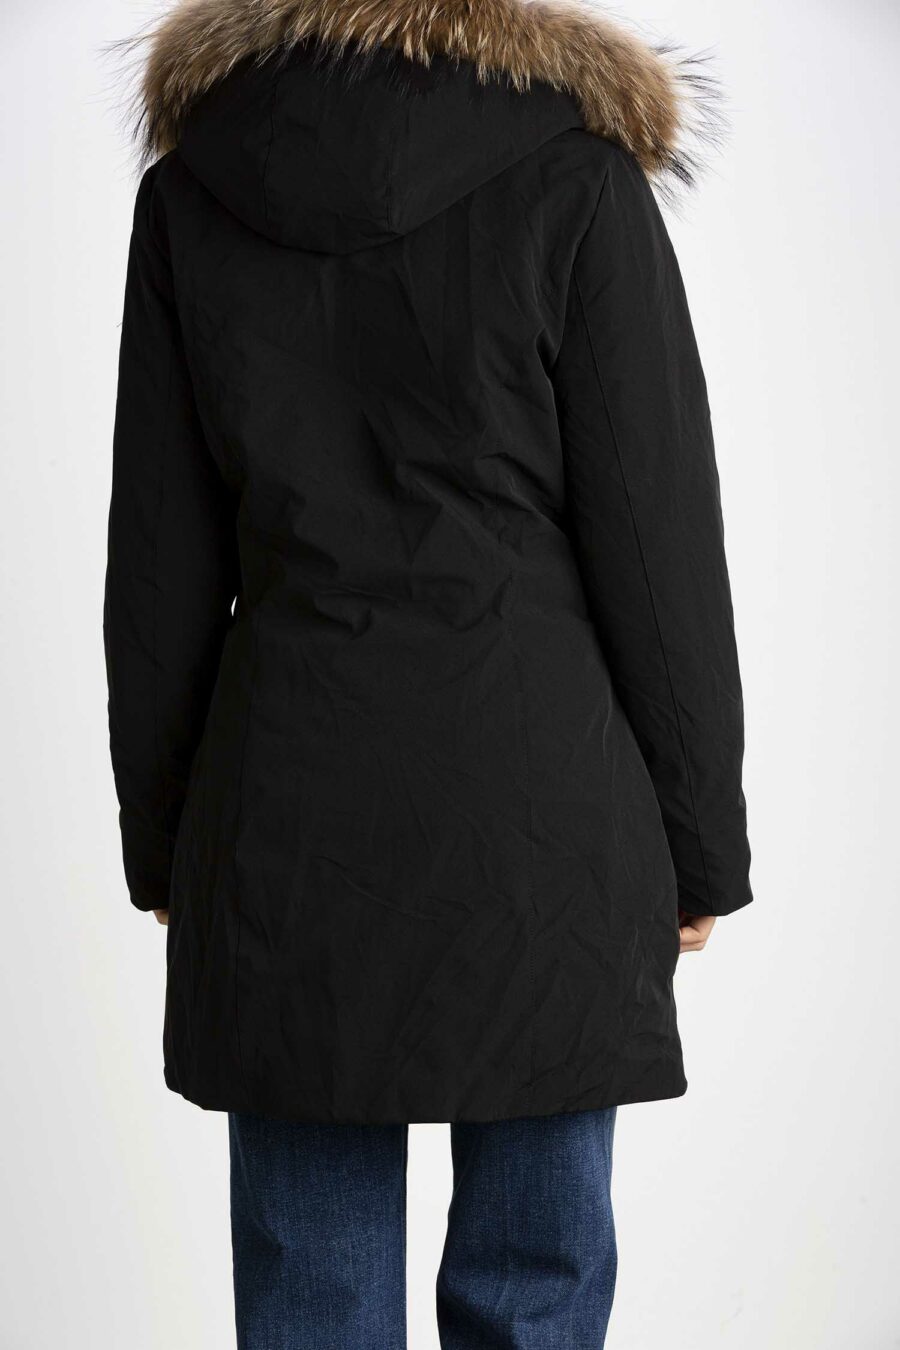 YES ZEE-CAPPOTTO TIPO PARKA-ESO075NT00 NERO